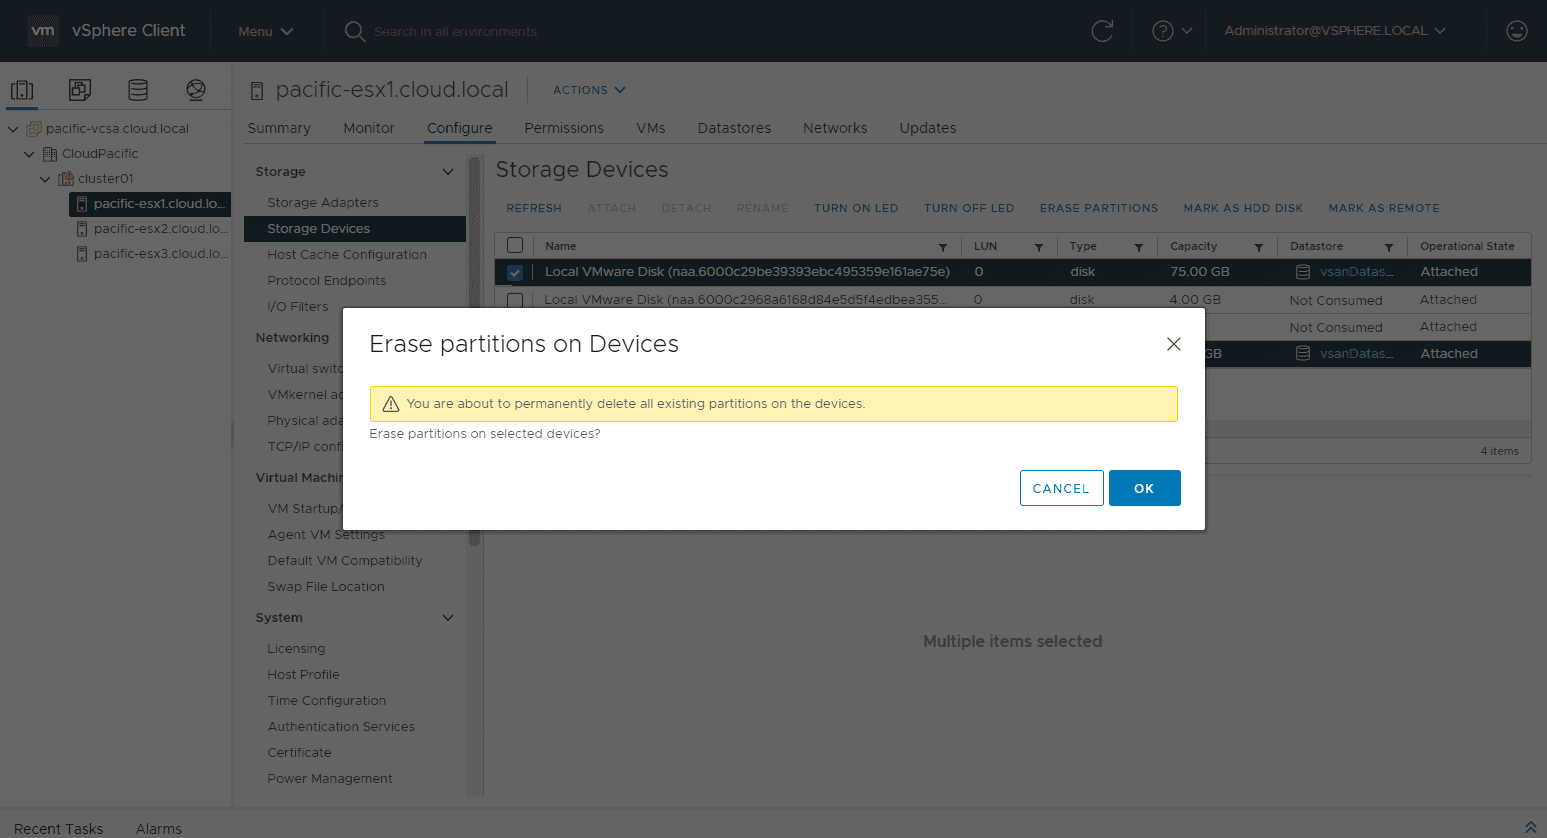 Confirming to erase vsan partitions